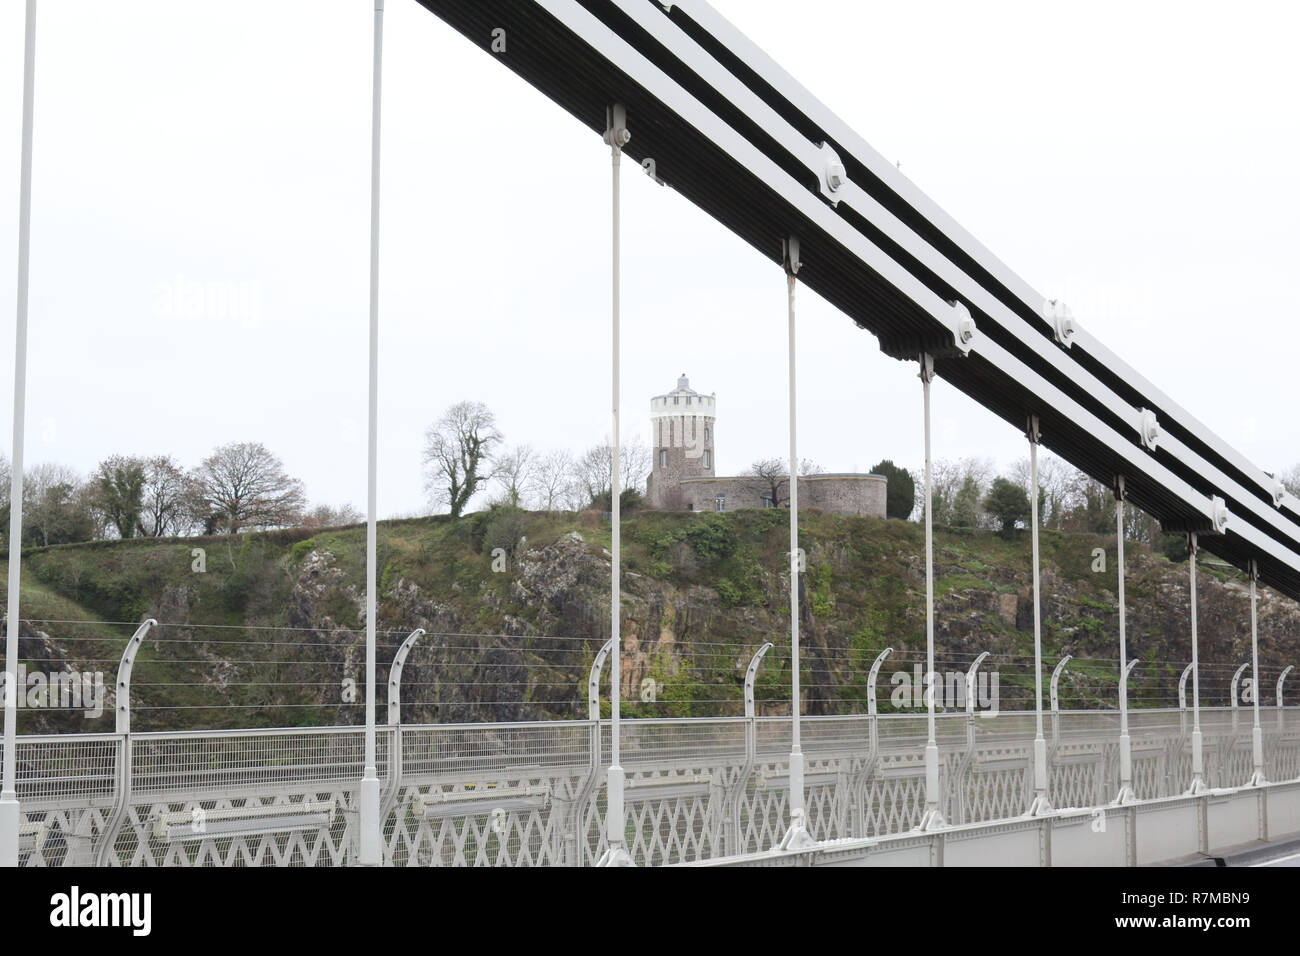 A detail of the deck, the suspender and main cables and the tower of the Clifton Suspension Bridge over the Avon river in Bristol, United Kingdom Stock Photo